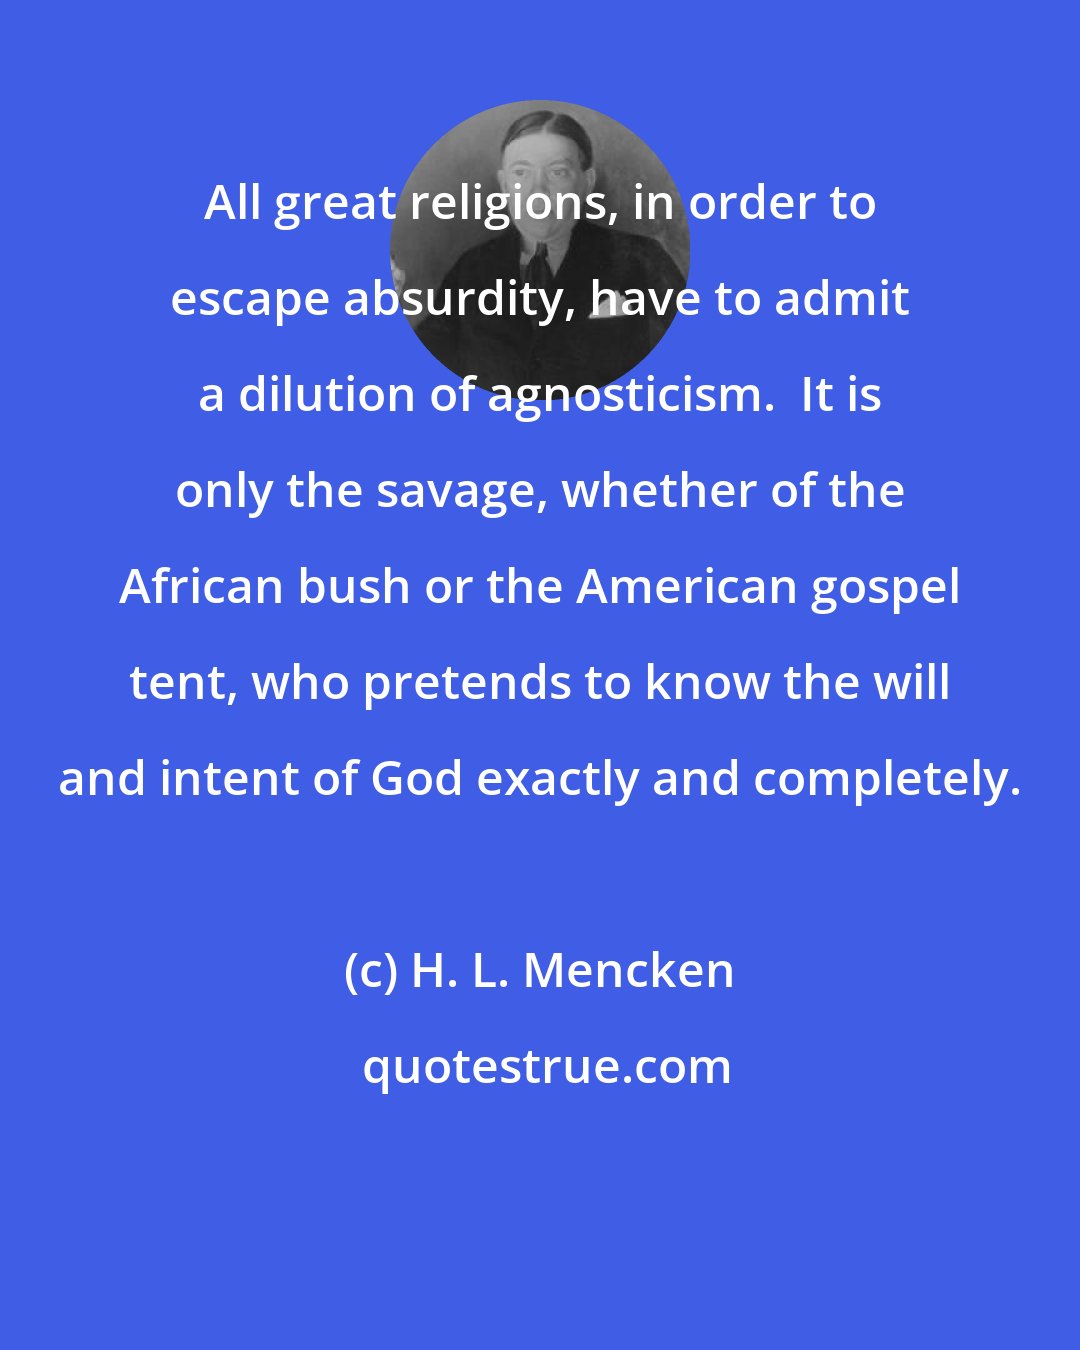 H. L. Mencken: All great religions, in order to escape absurdity, have to admit a dilution of agnosticism.  It is only the savage, whether of the African bush or the American gospel tent, who pretends to know the will and intent of God exactly and completely.